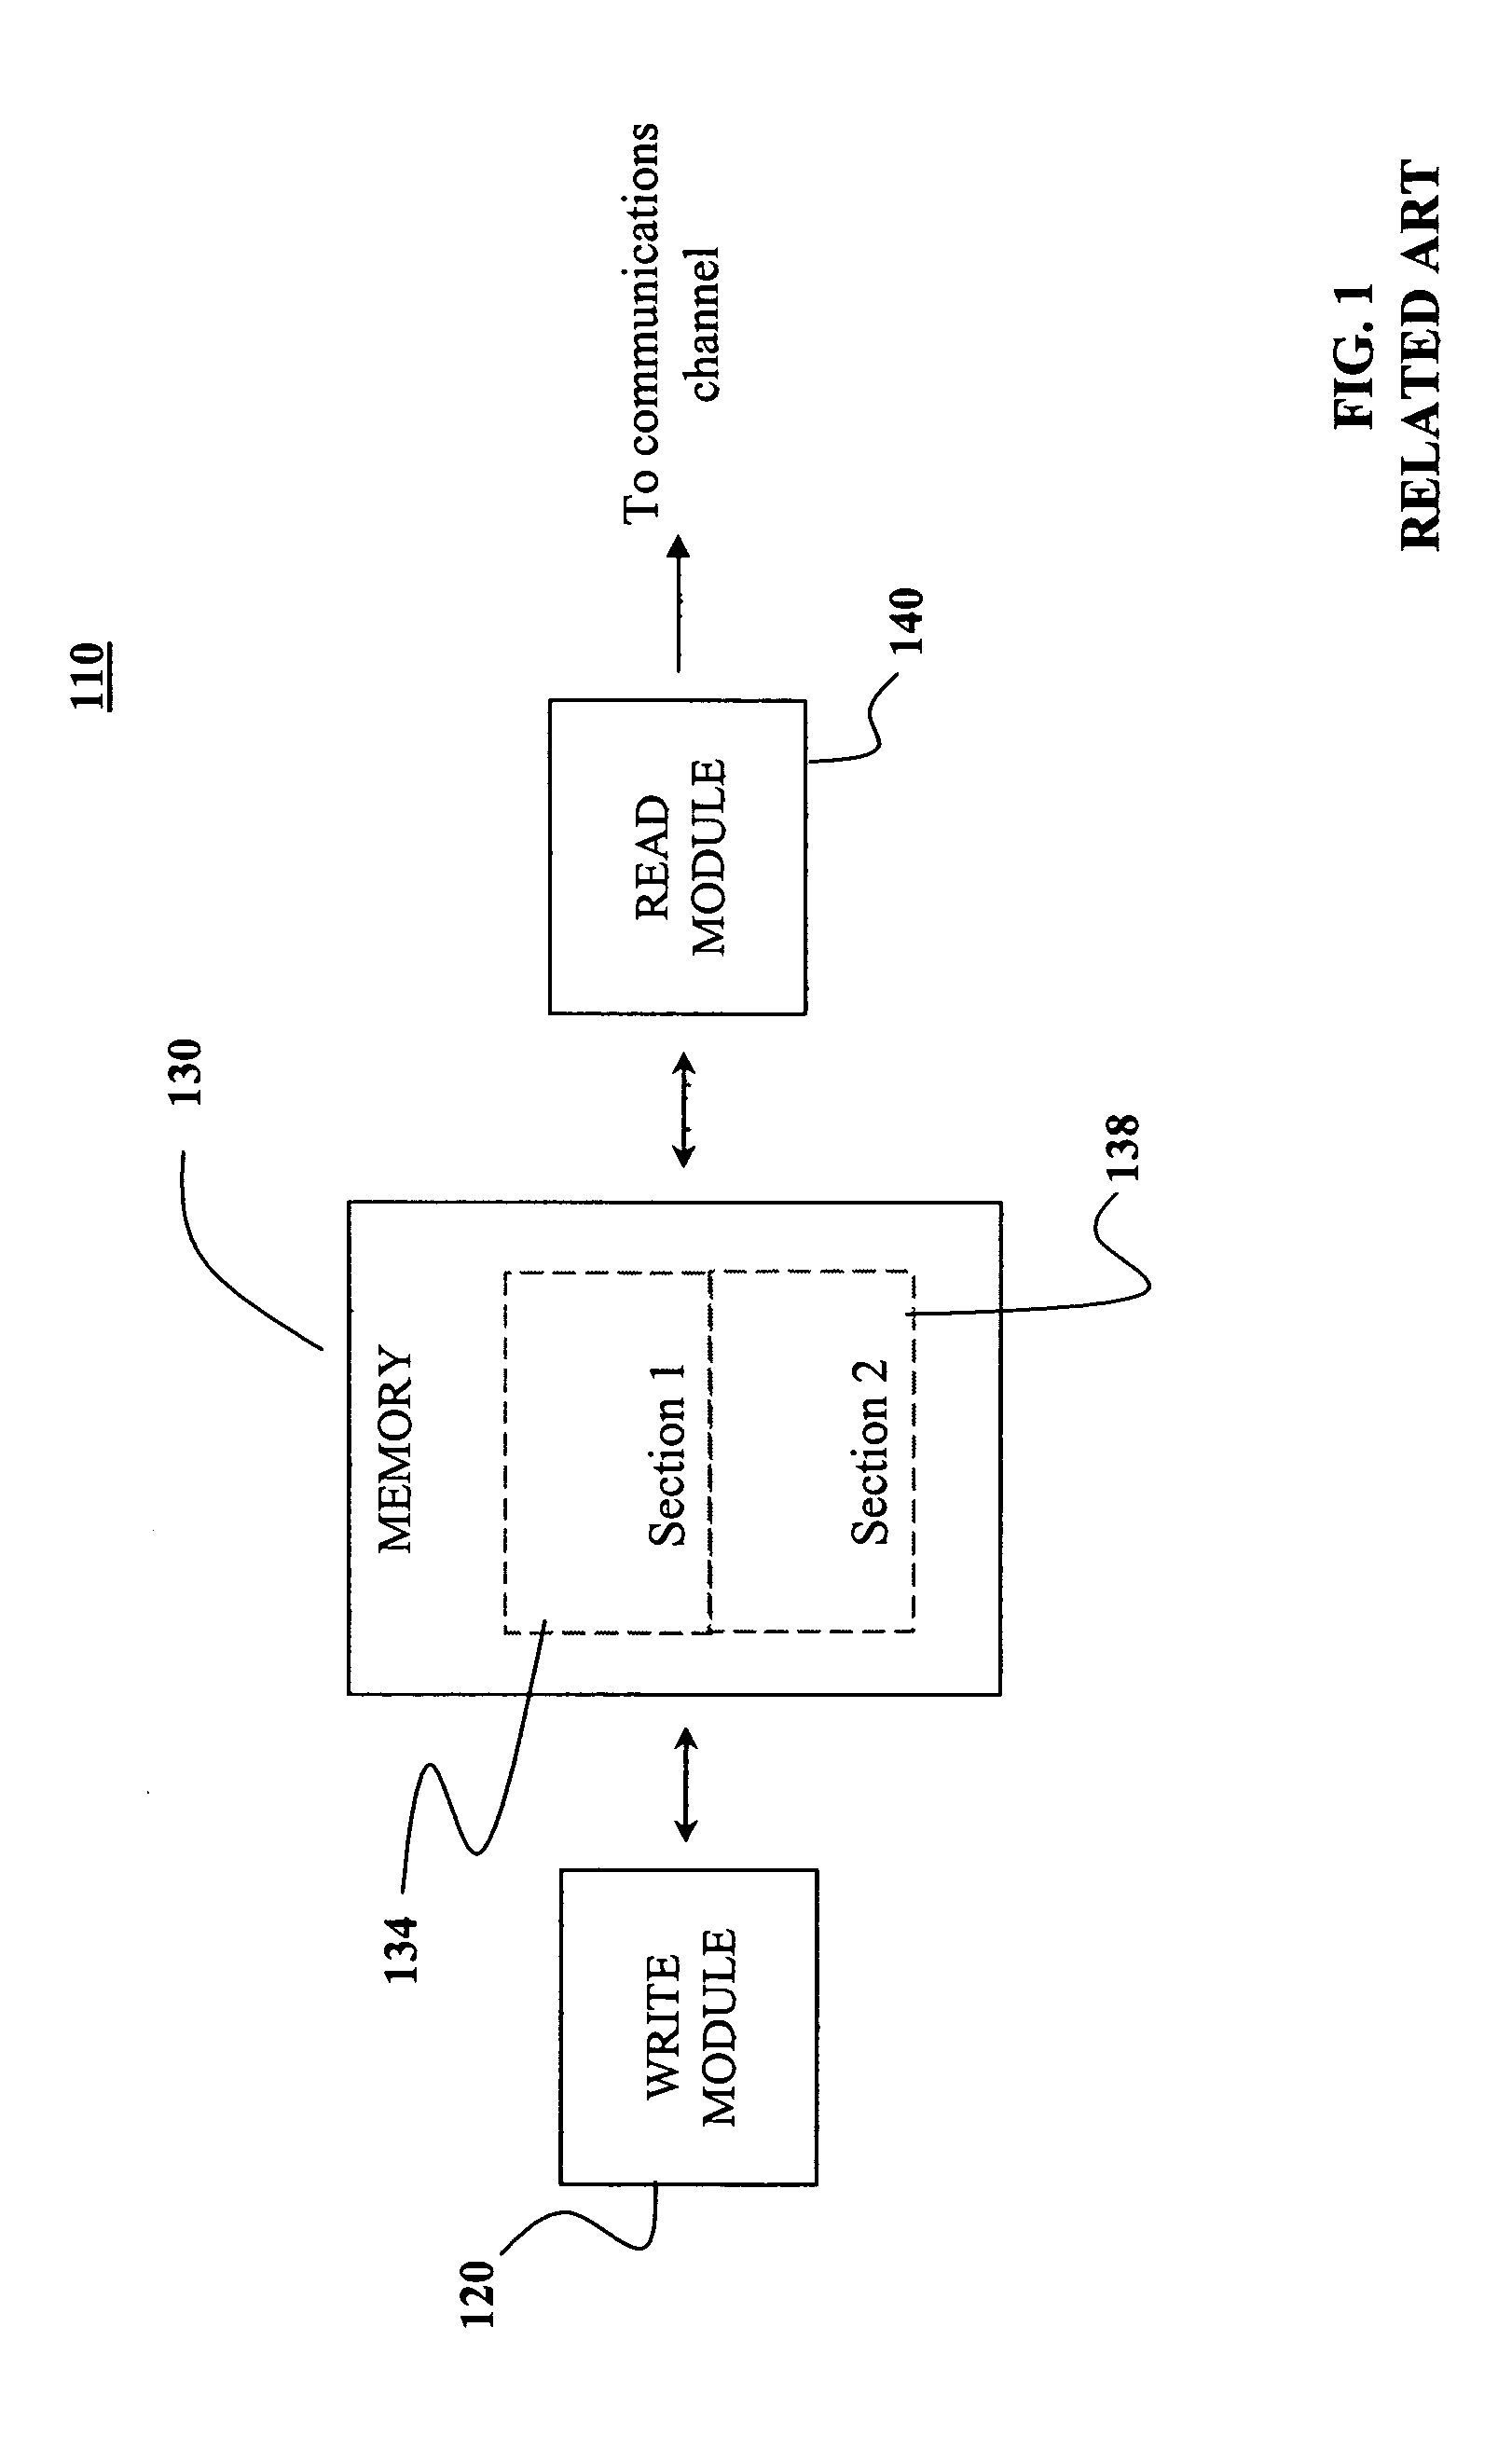 System and method for interleaving data in a communications device